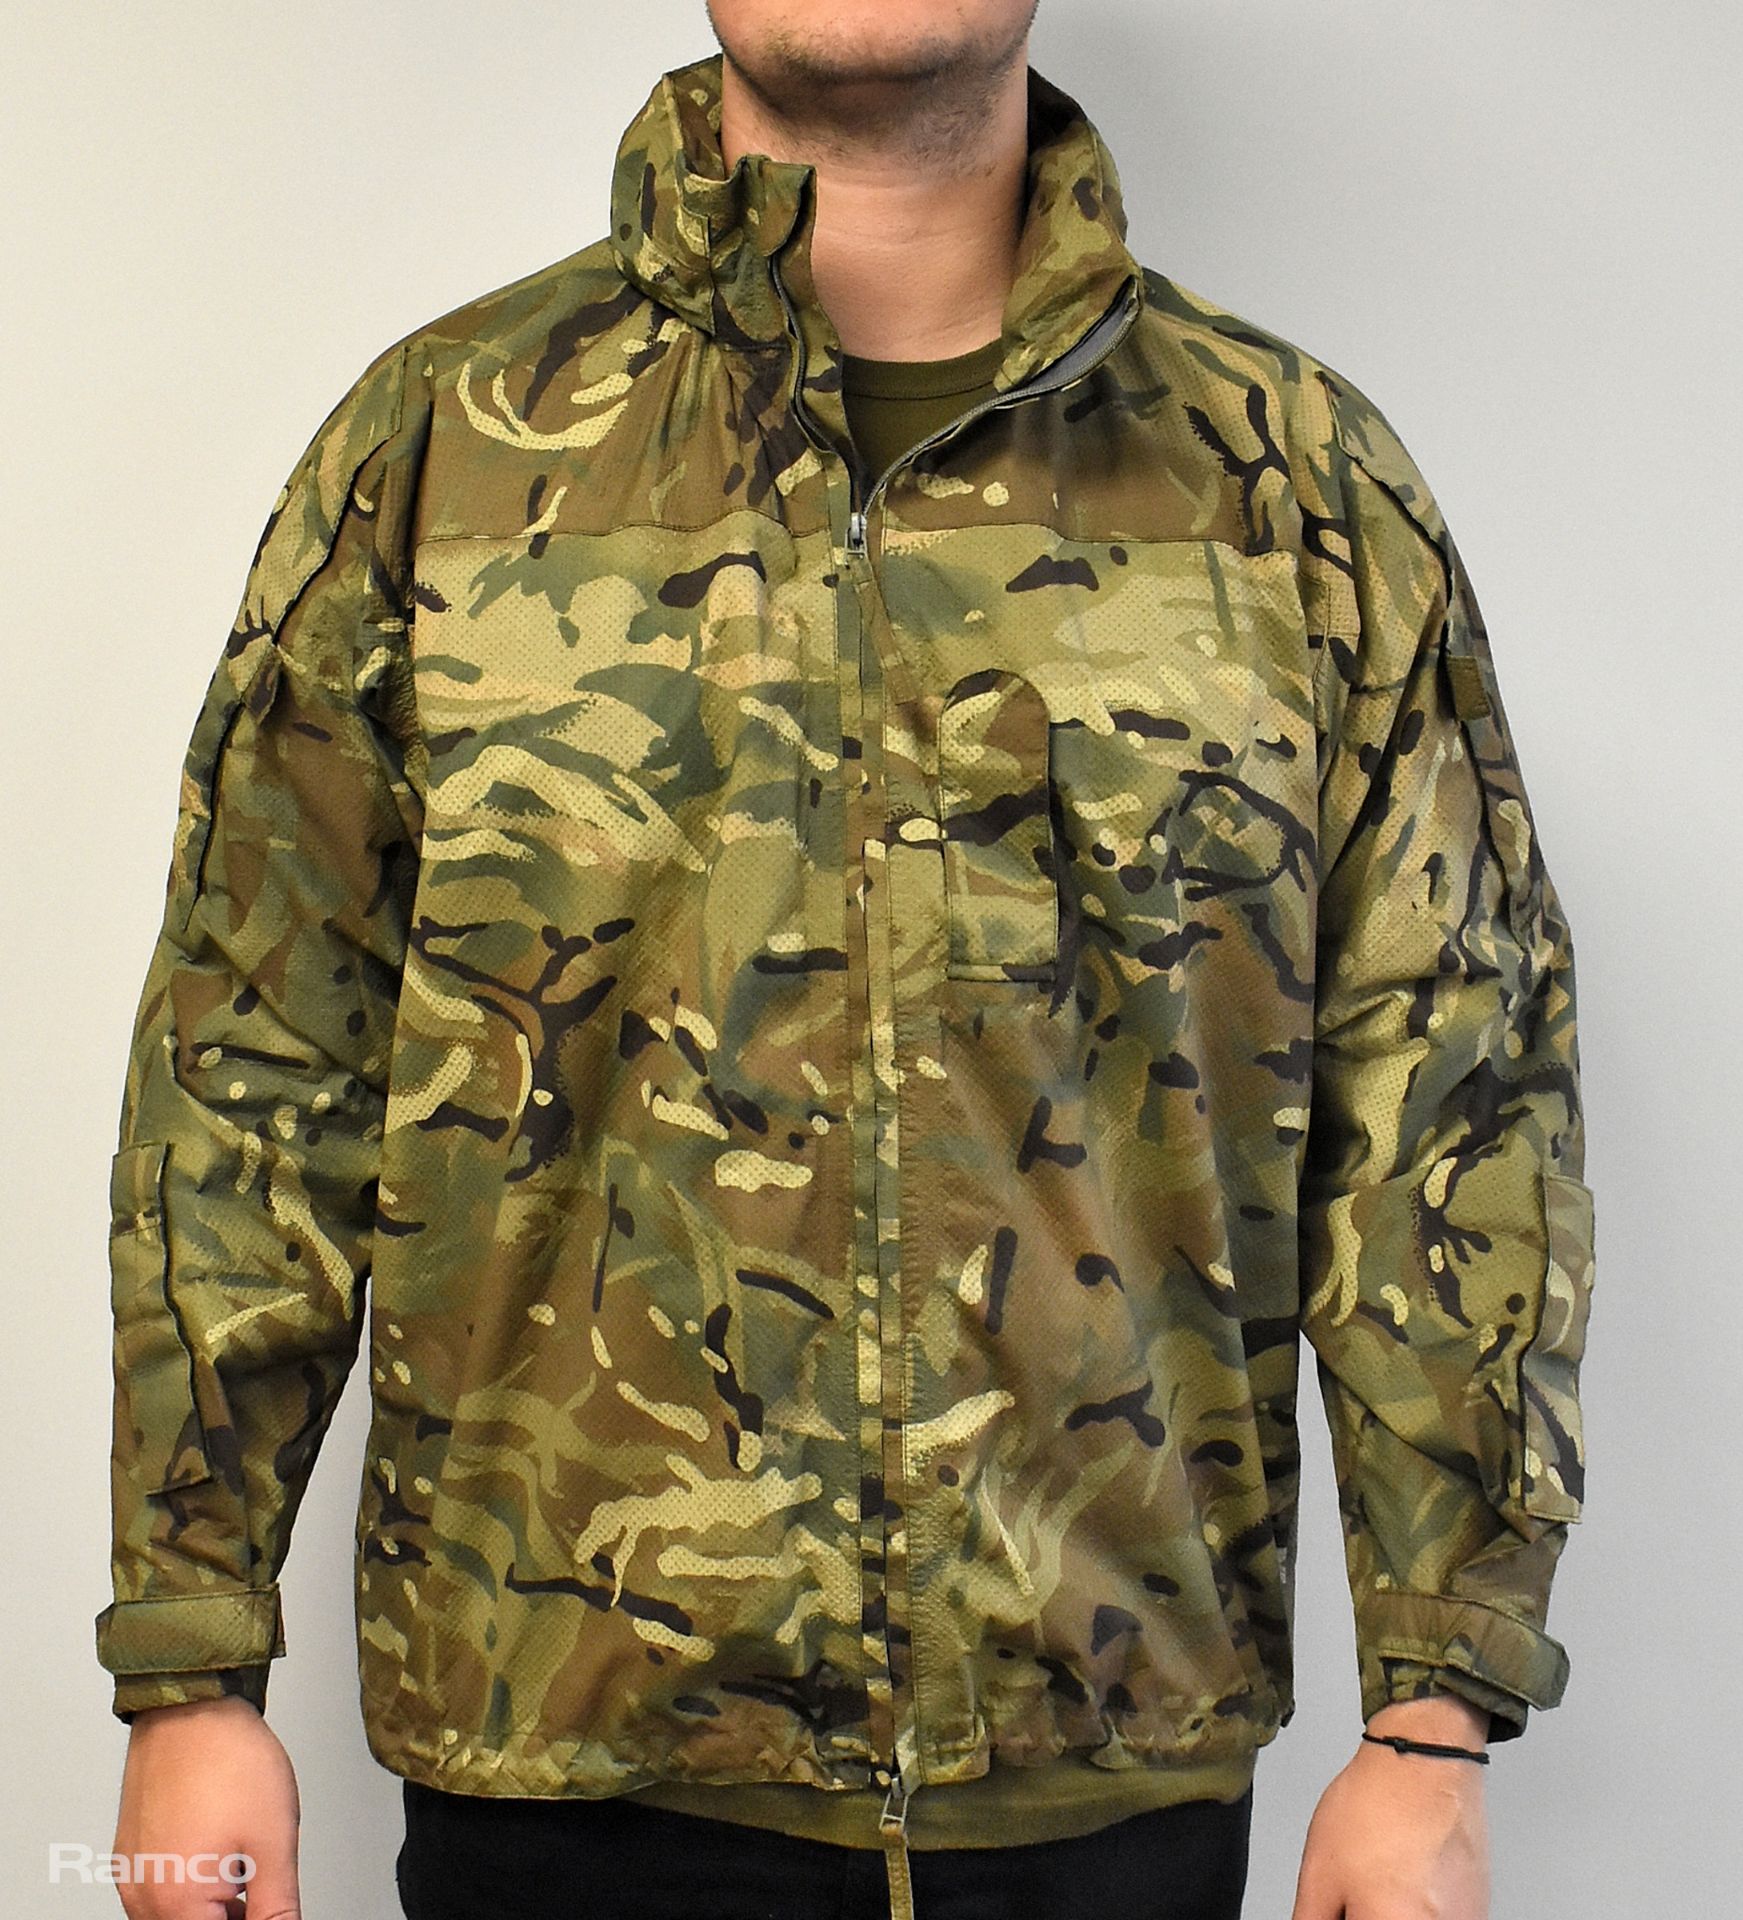 100x British Army MTP waterproof lightweight jackets - mixed grades and sizes